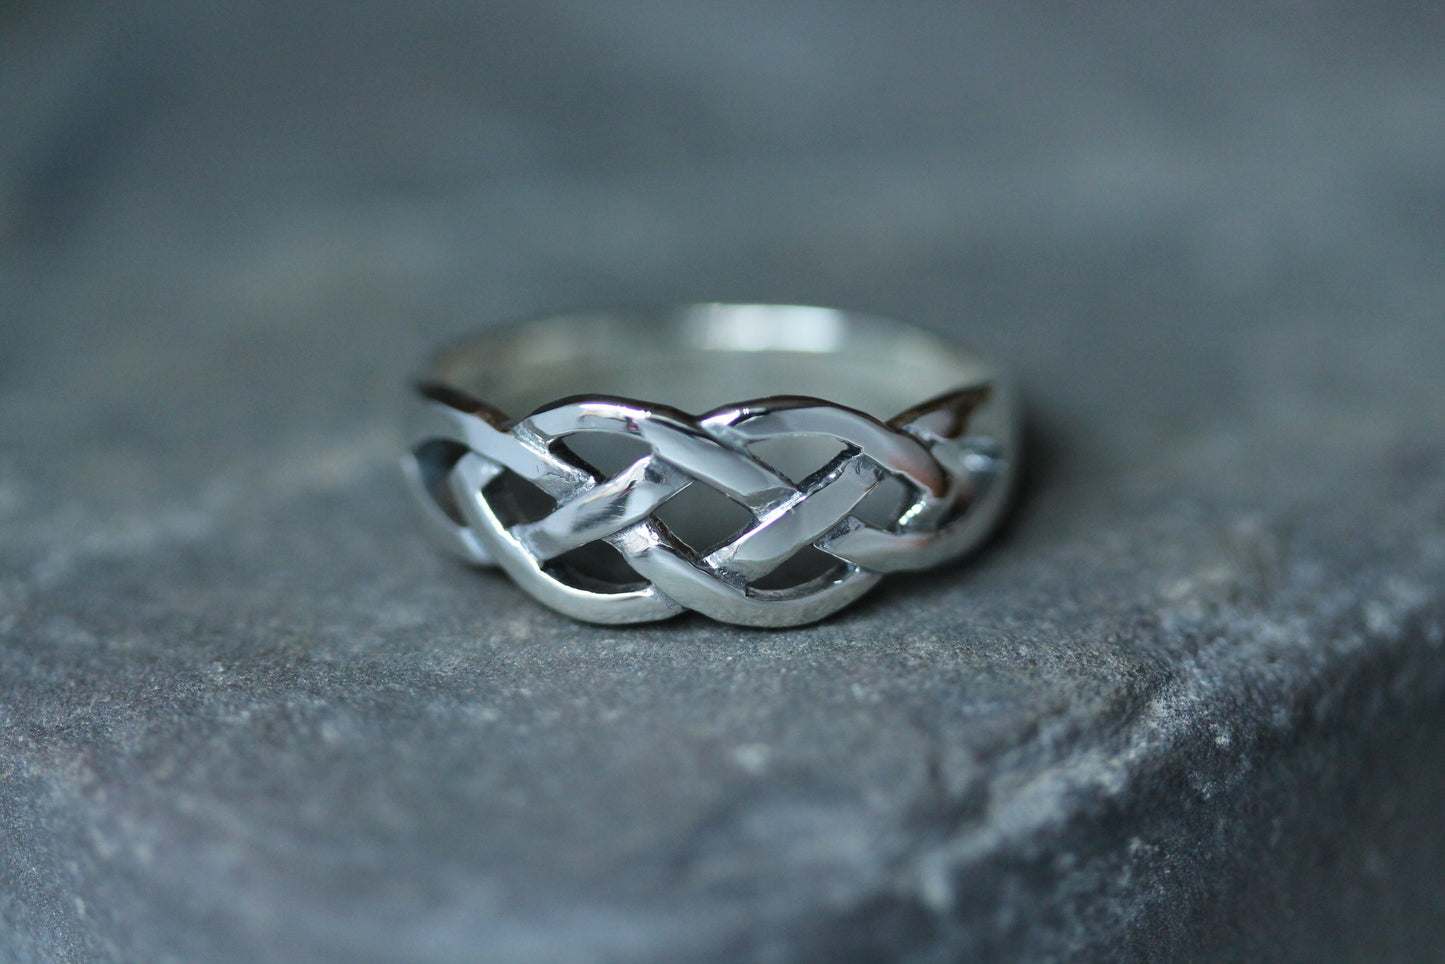 Celtic Knot Ring - Woven Knot